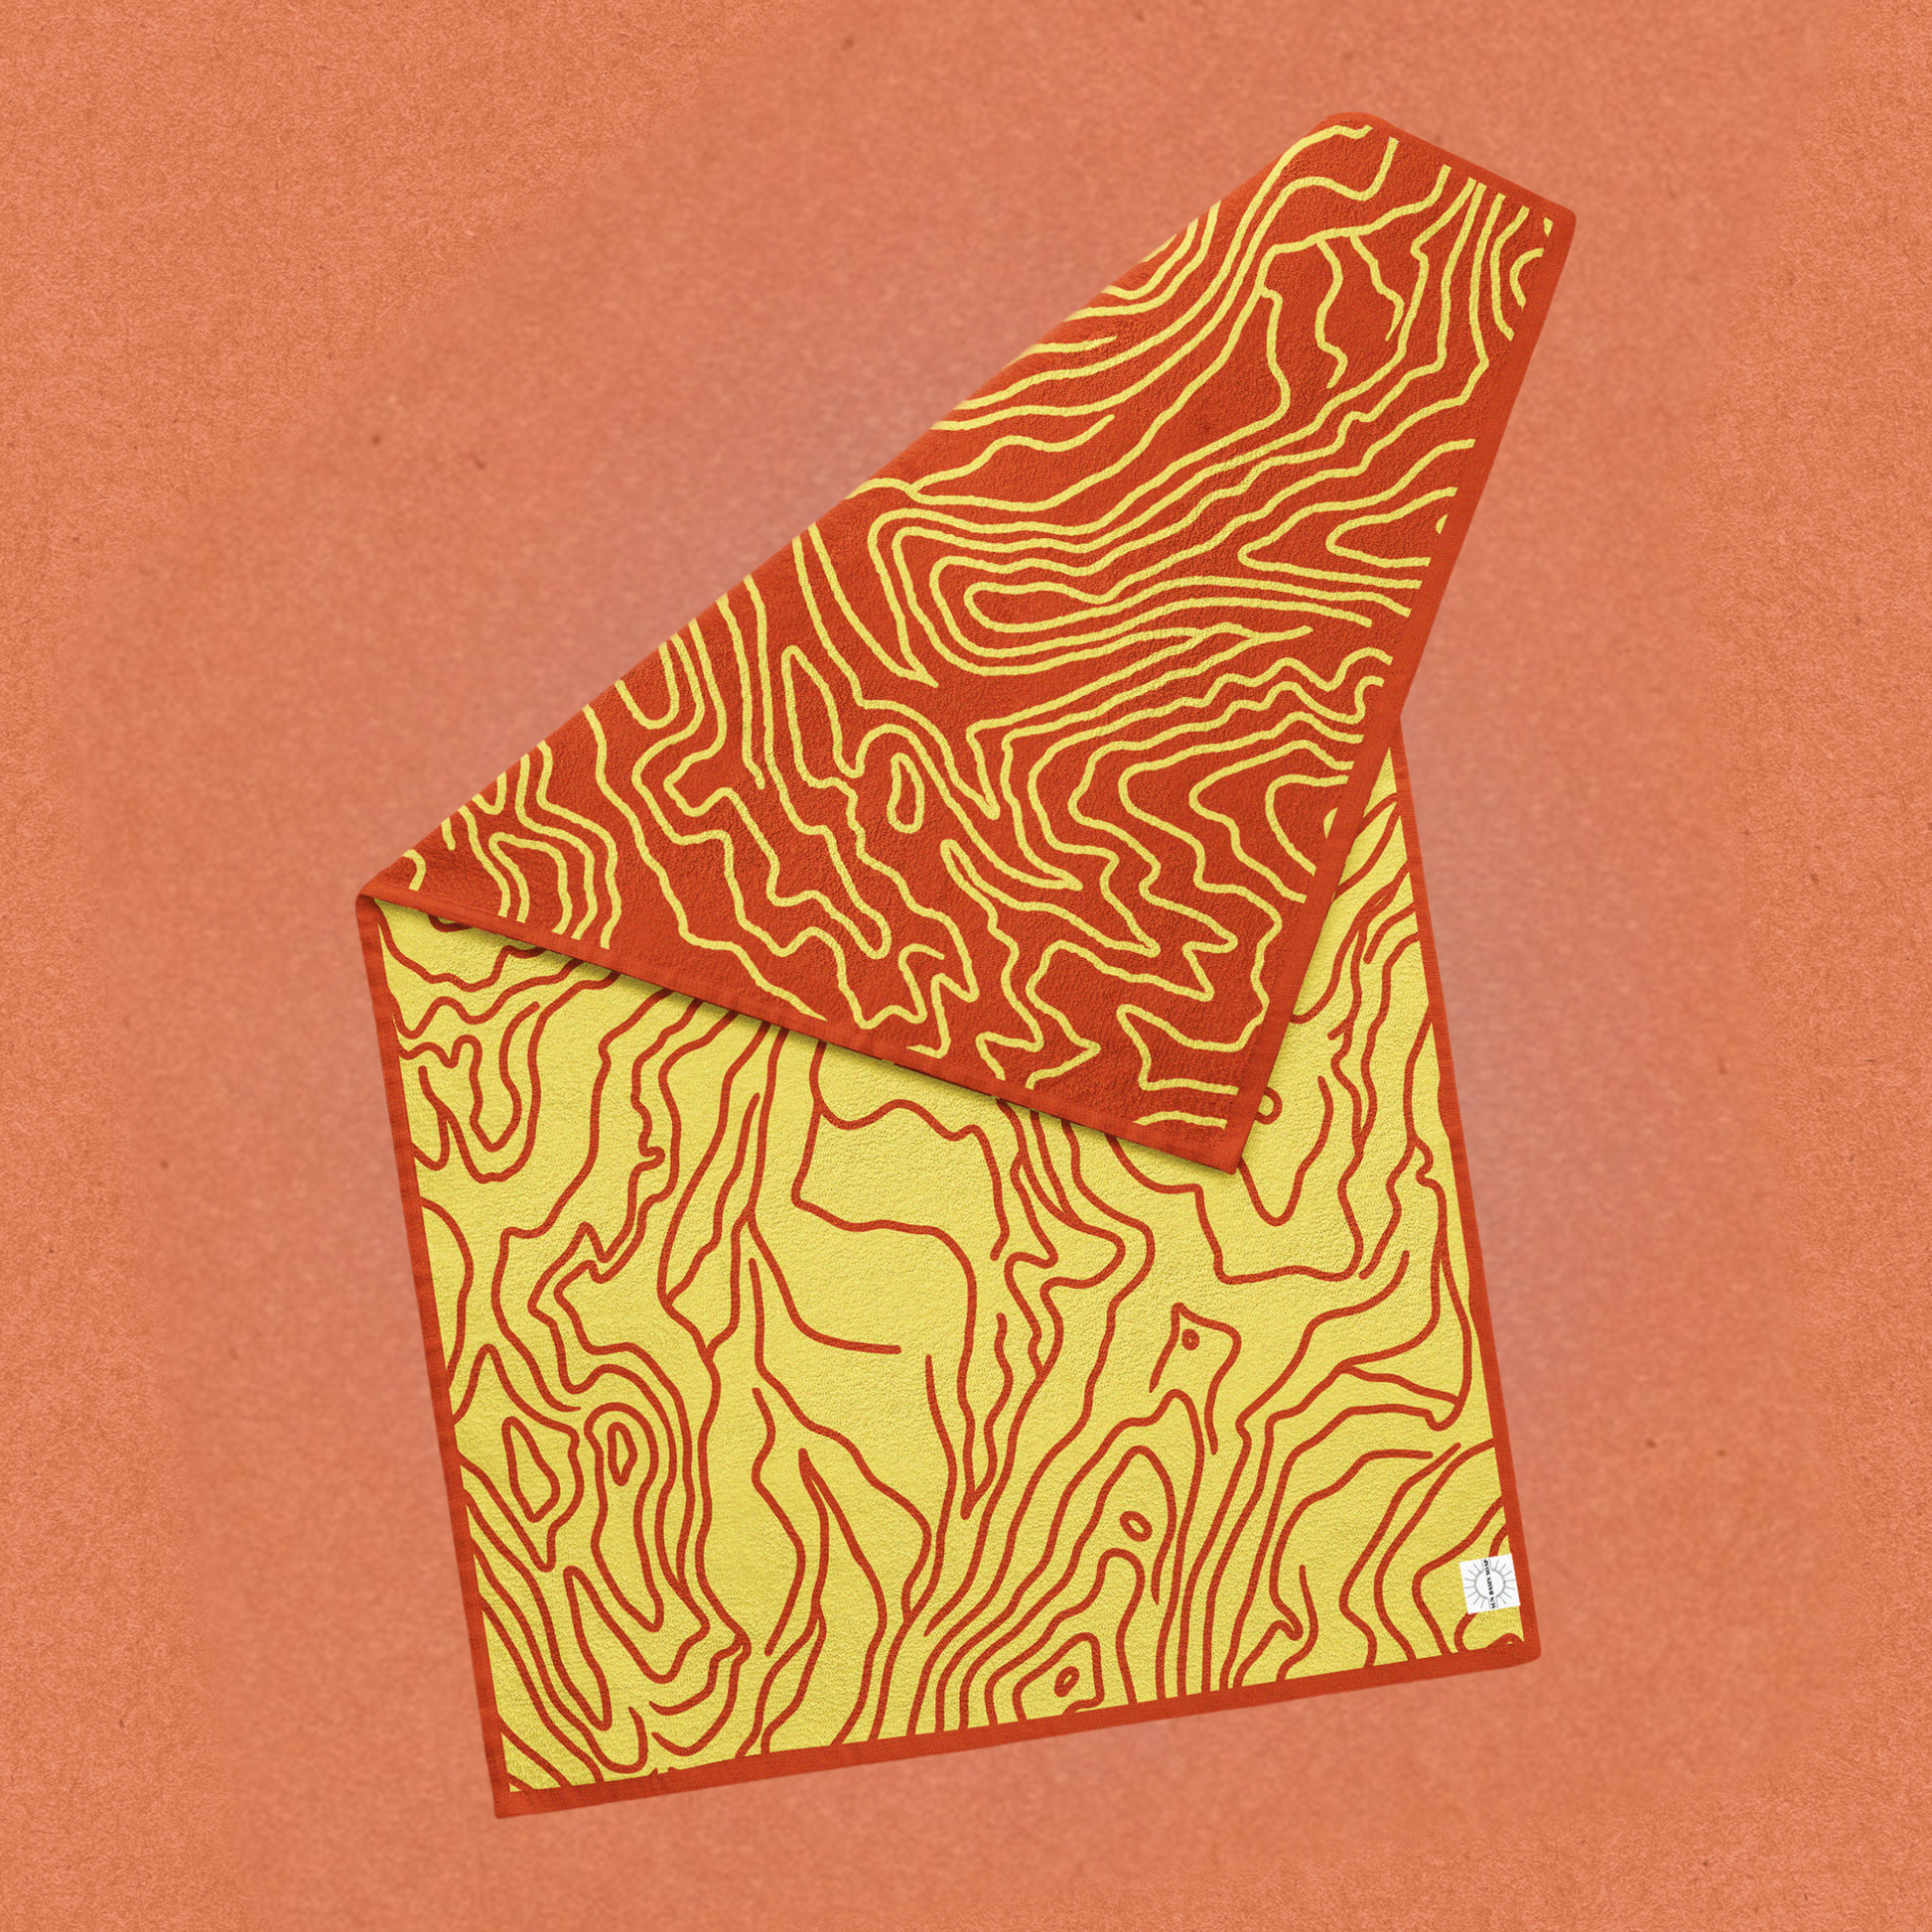 A reversible dark orange and yellow topographic towel with a corner folded down with a small tag that has the Sun Basin Soap logo. The towel is in front of a light orange background. A Good Store subscription product.